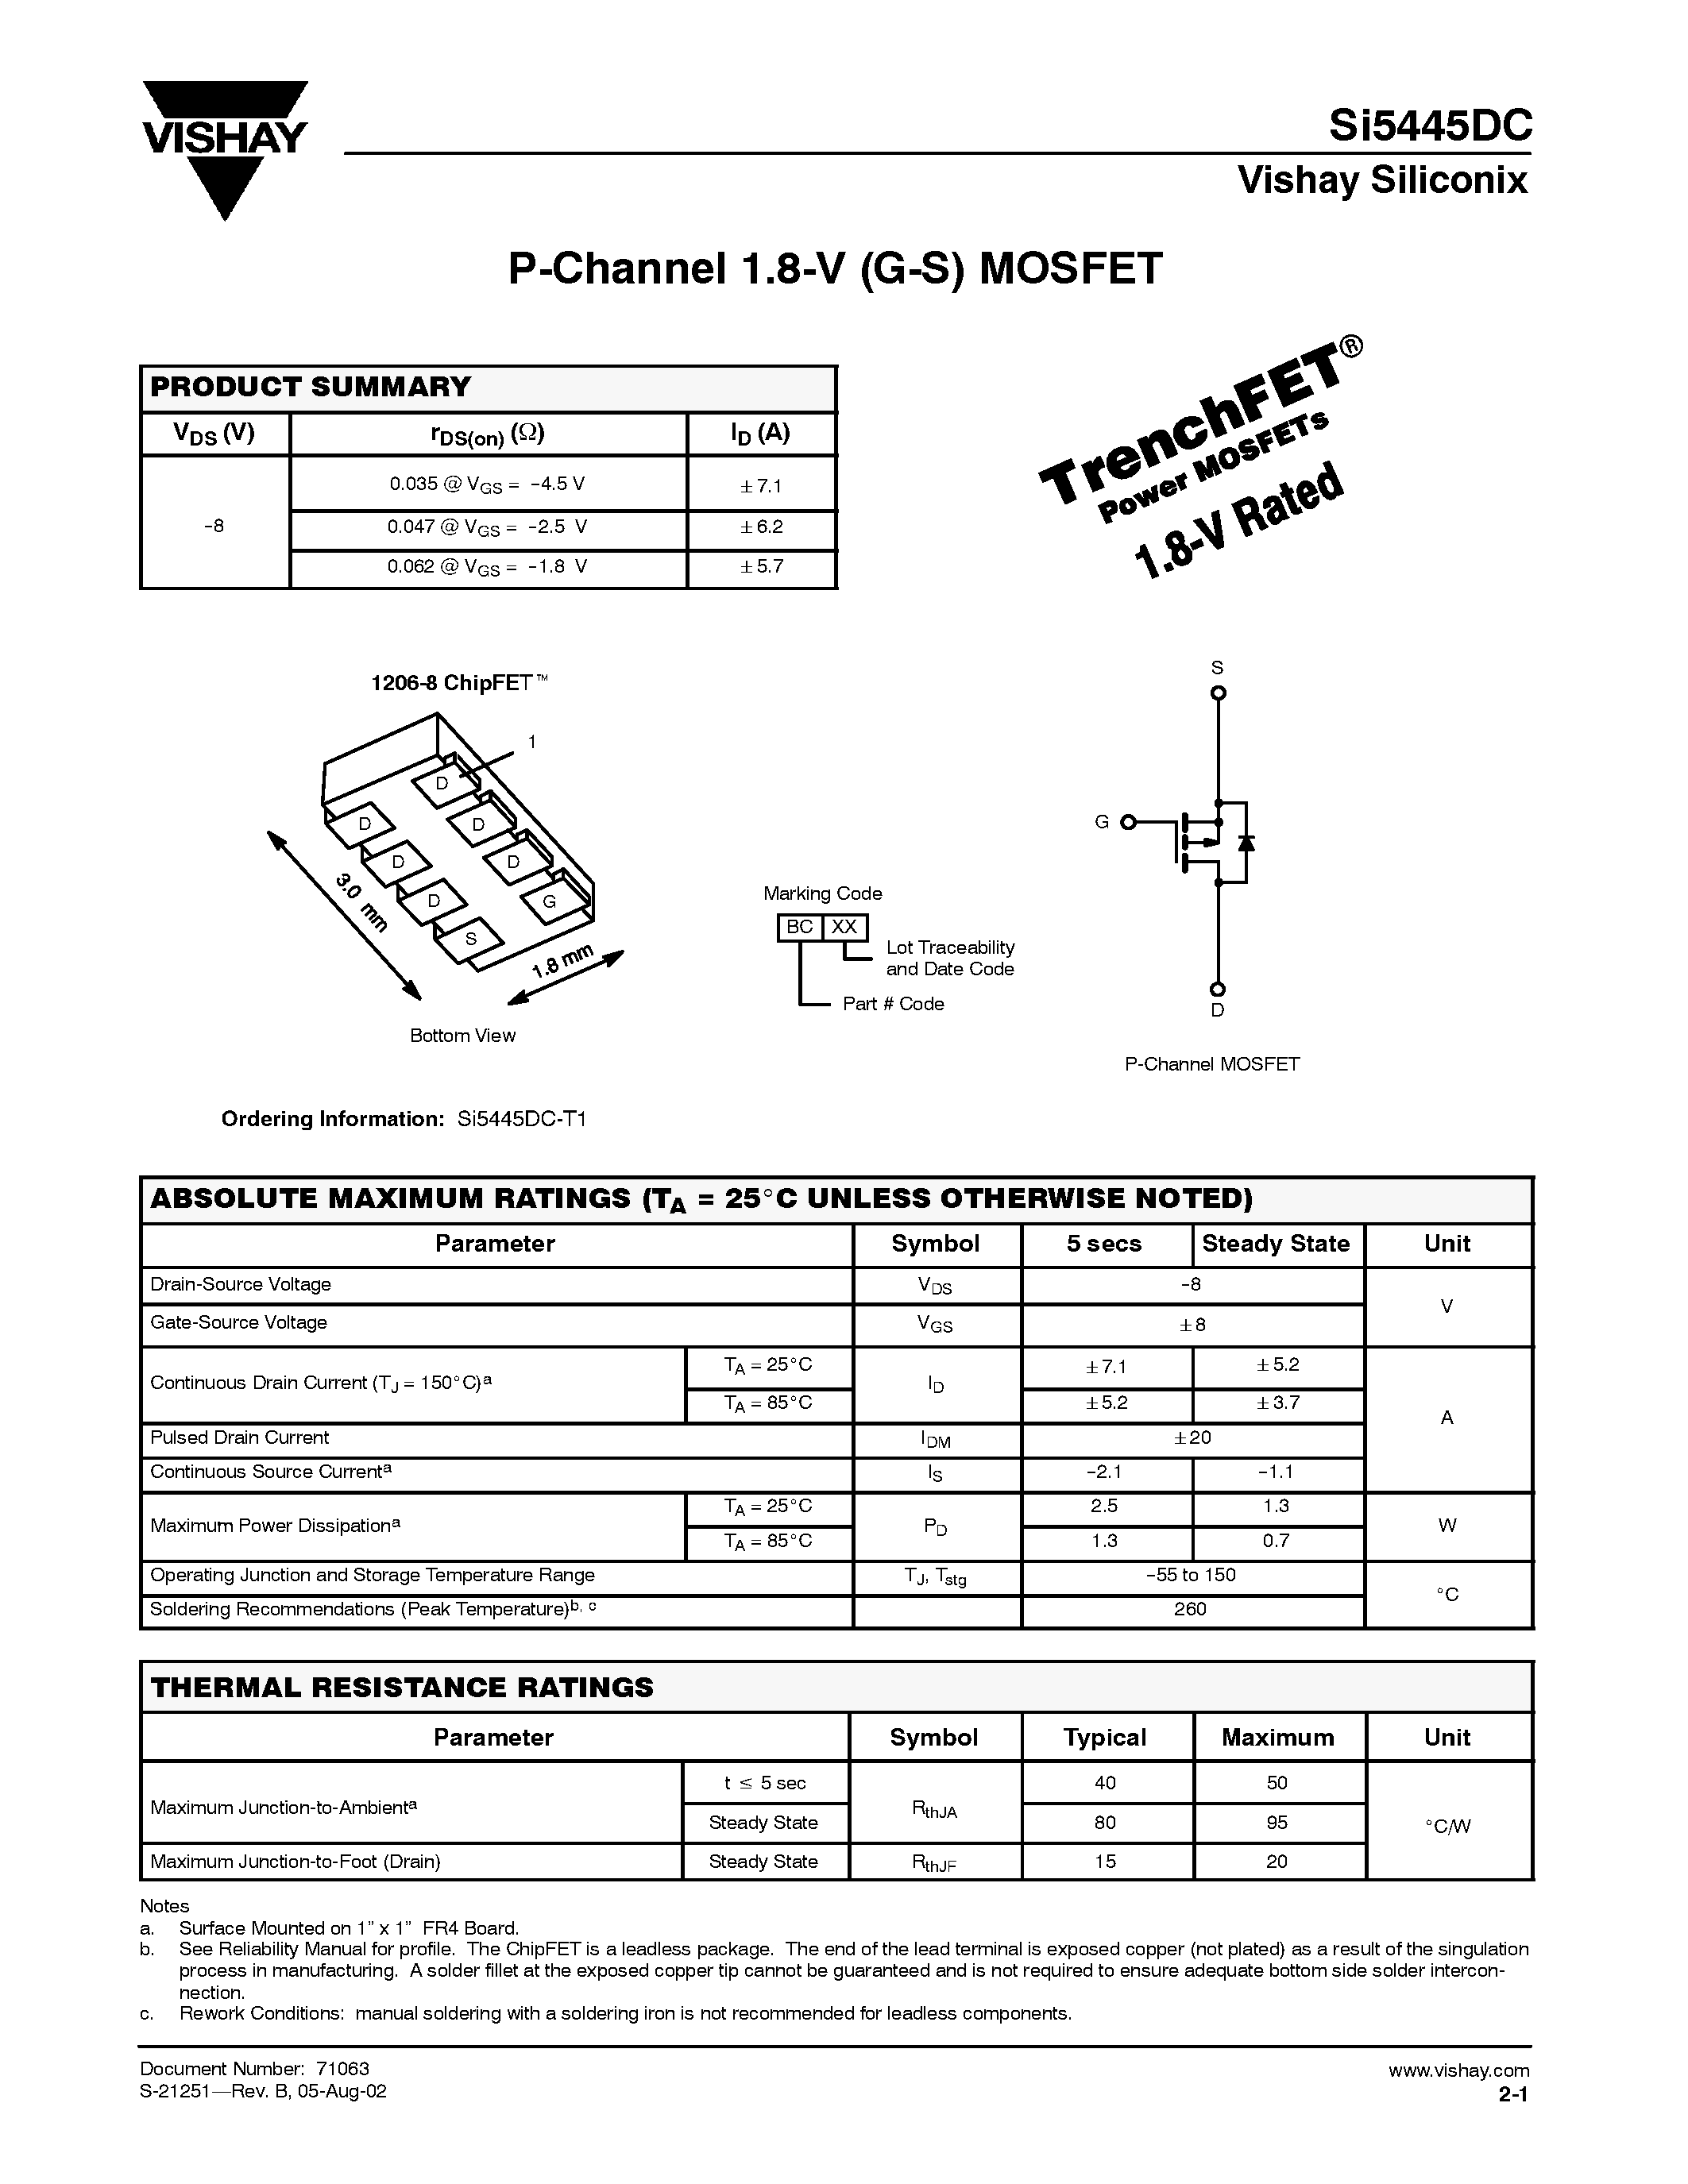 Даташит SI5445DC-T1 - P-Channel 1.8-V (G-S) MOSFET страница 1